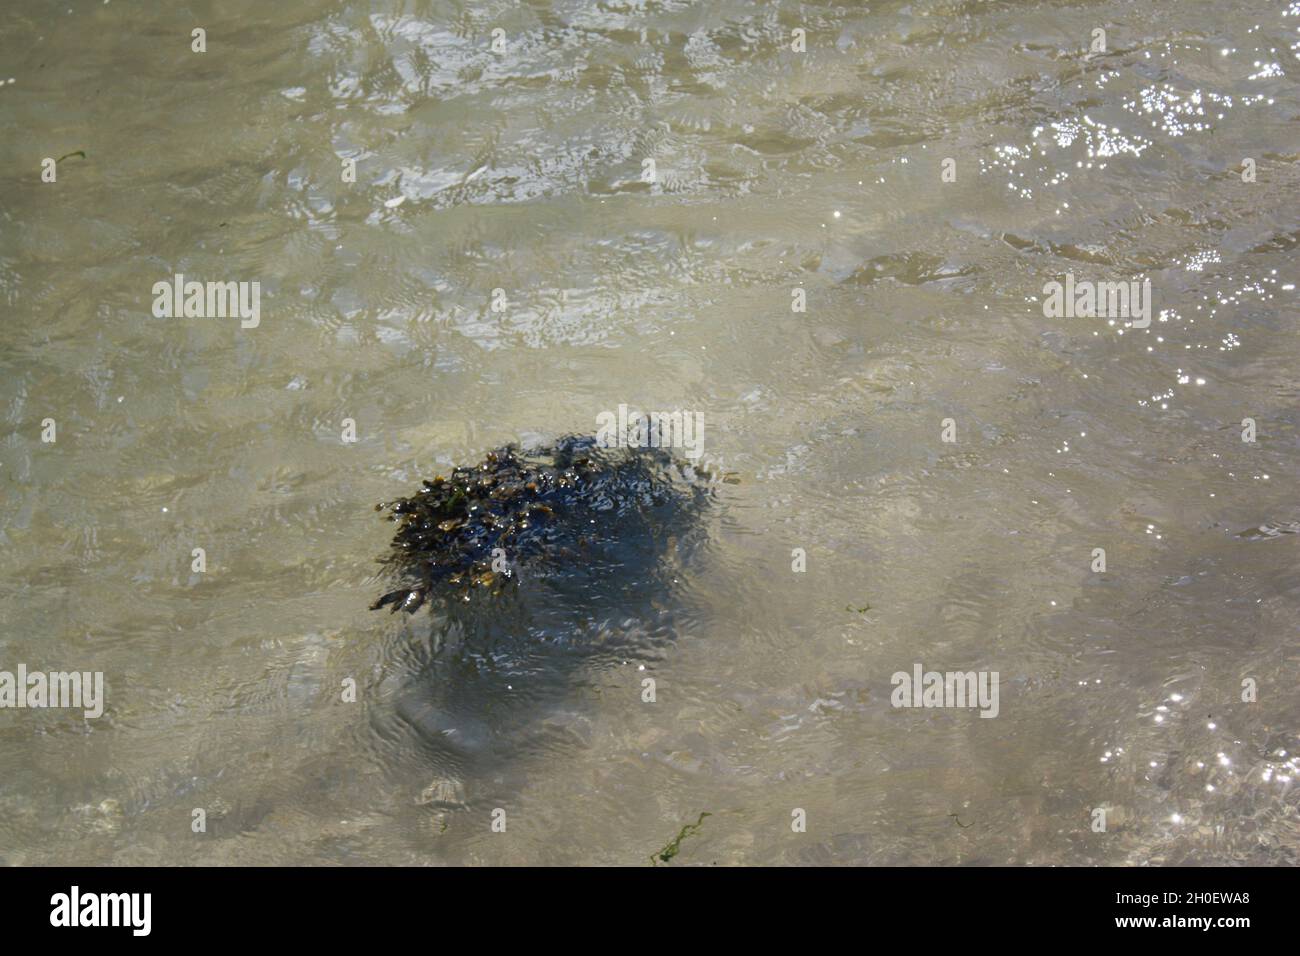 A clump of seaweed floats off the cost of Scotland. Stock Photo